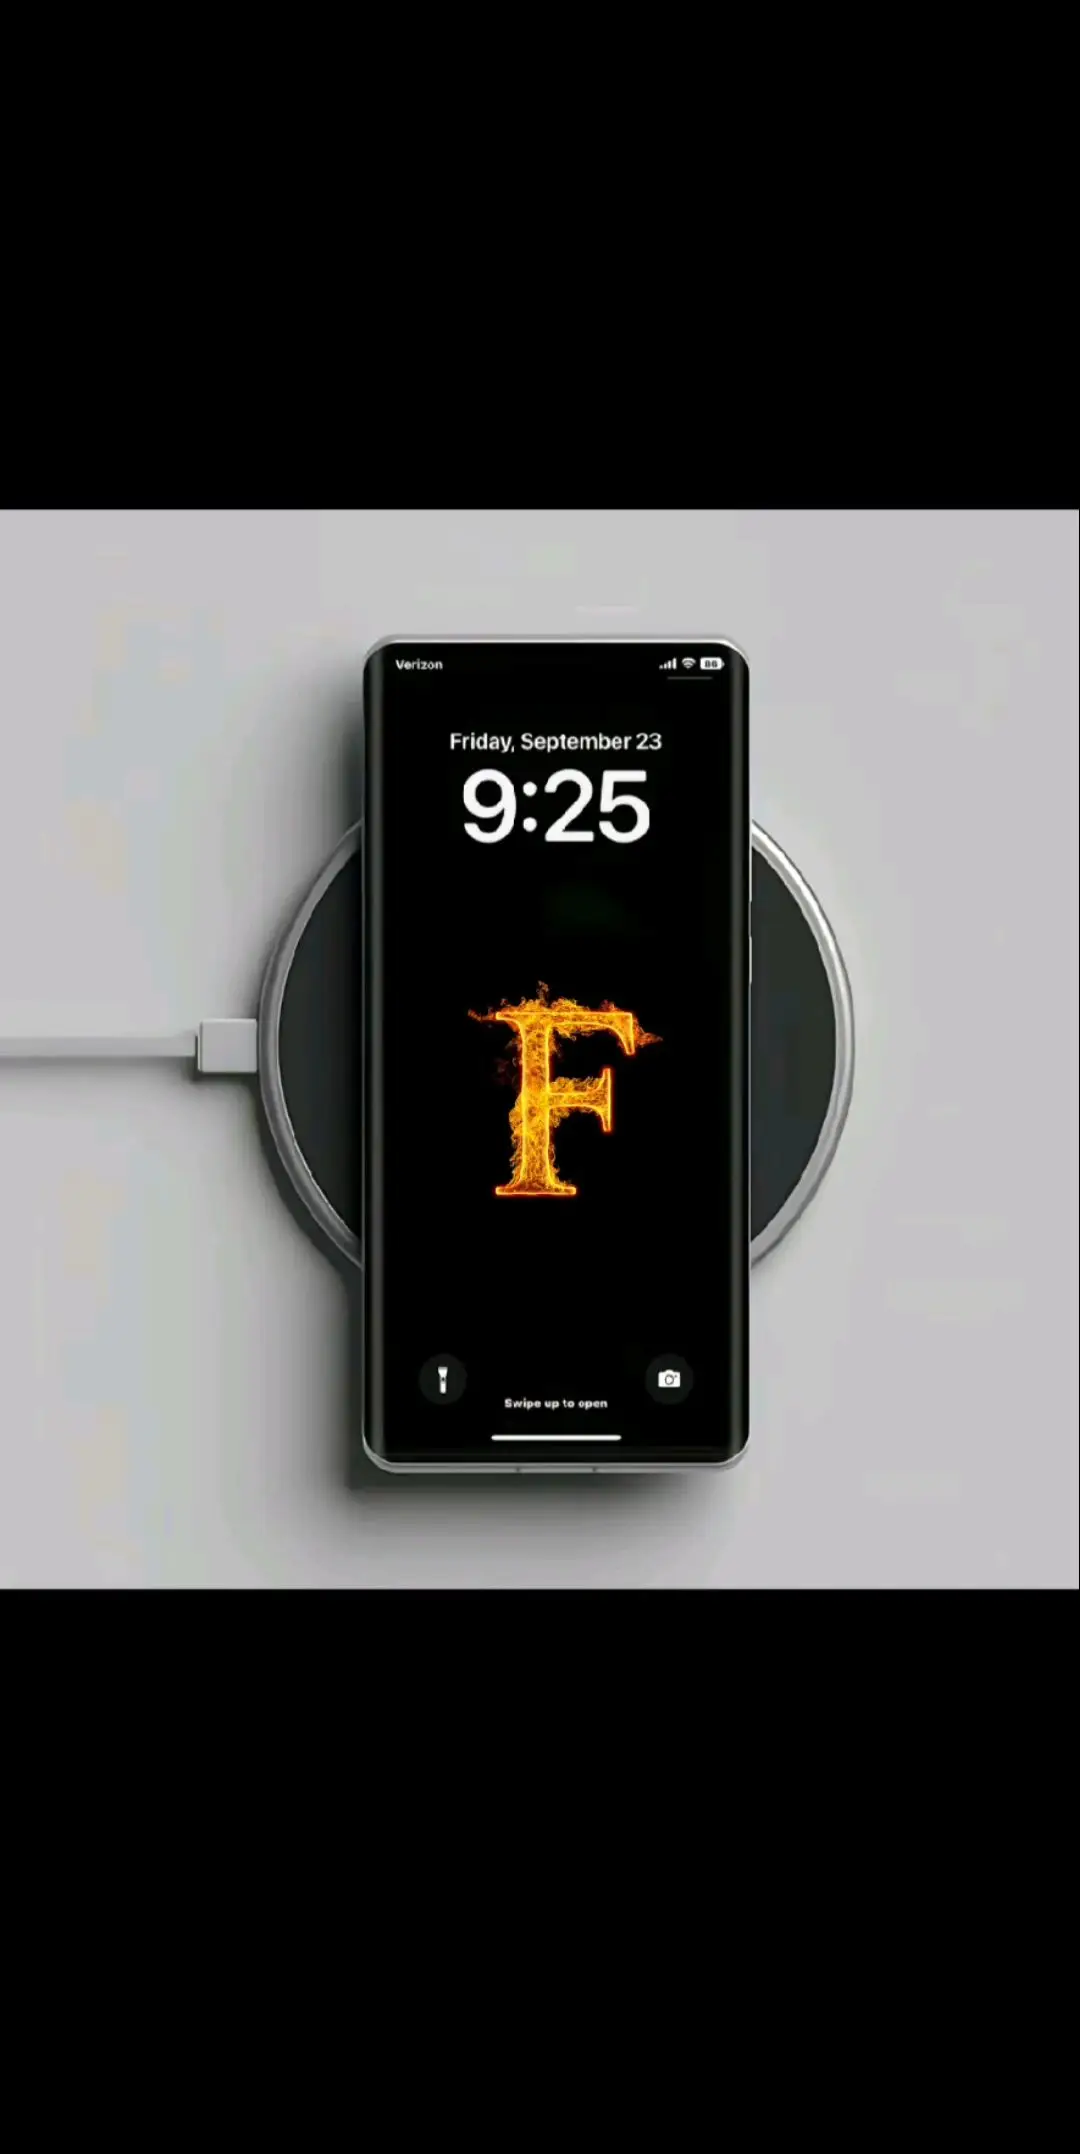 ( F ) Letter Wallpaper  unfrezz my account 🥺 #fletter #fletterwallpaper #homescreenwallpaper #lockscreenwallpaper #hdwallpapers #4kultrahd #wallpaper #lockscreen #4kwallpaper #wallpaper #4kultrahd00 #newwallpaper #foryou #foryoupage #viral #video #grow #account 